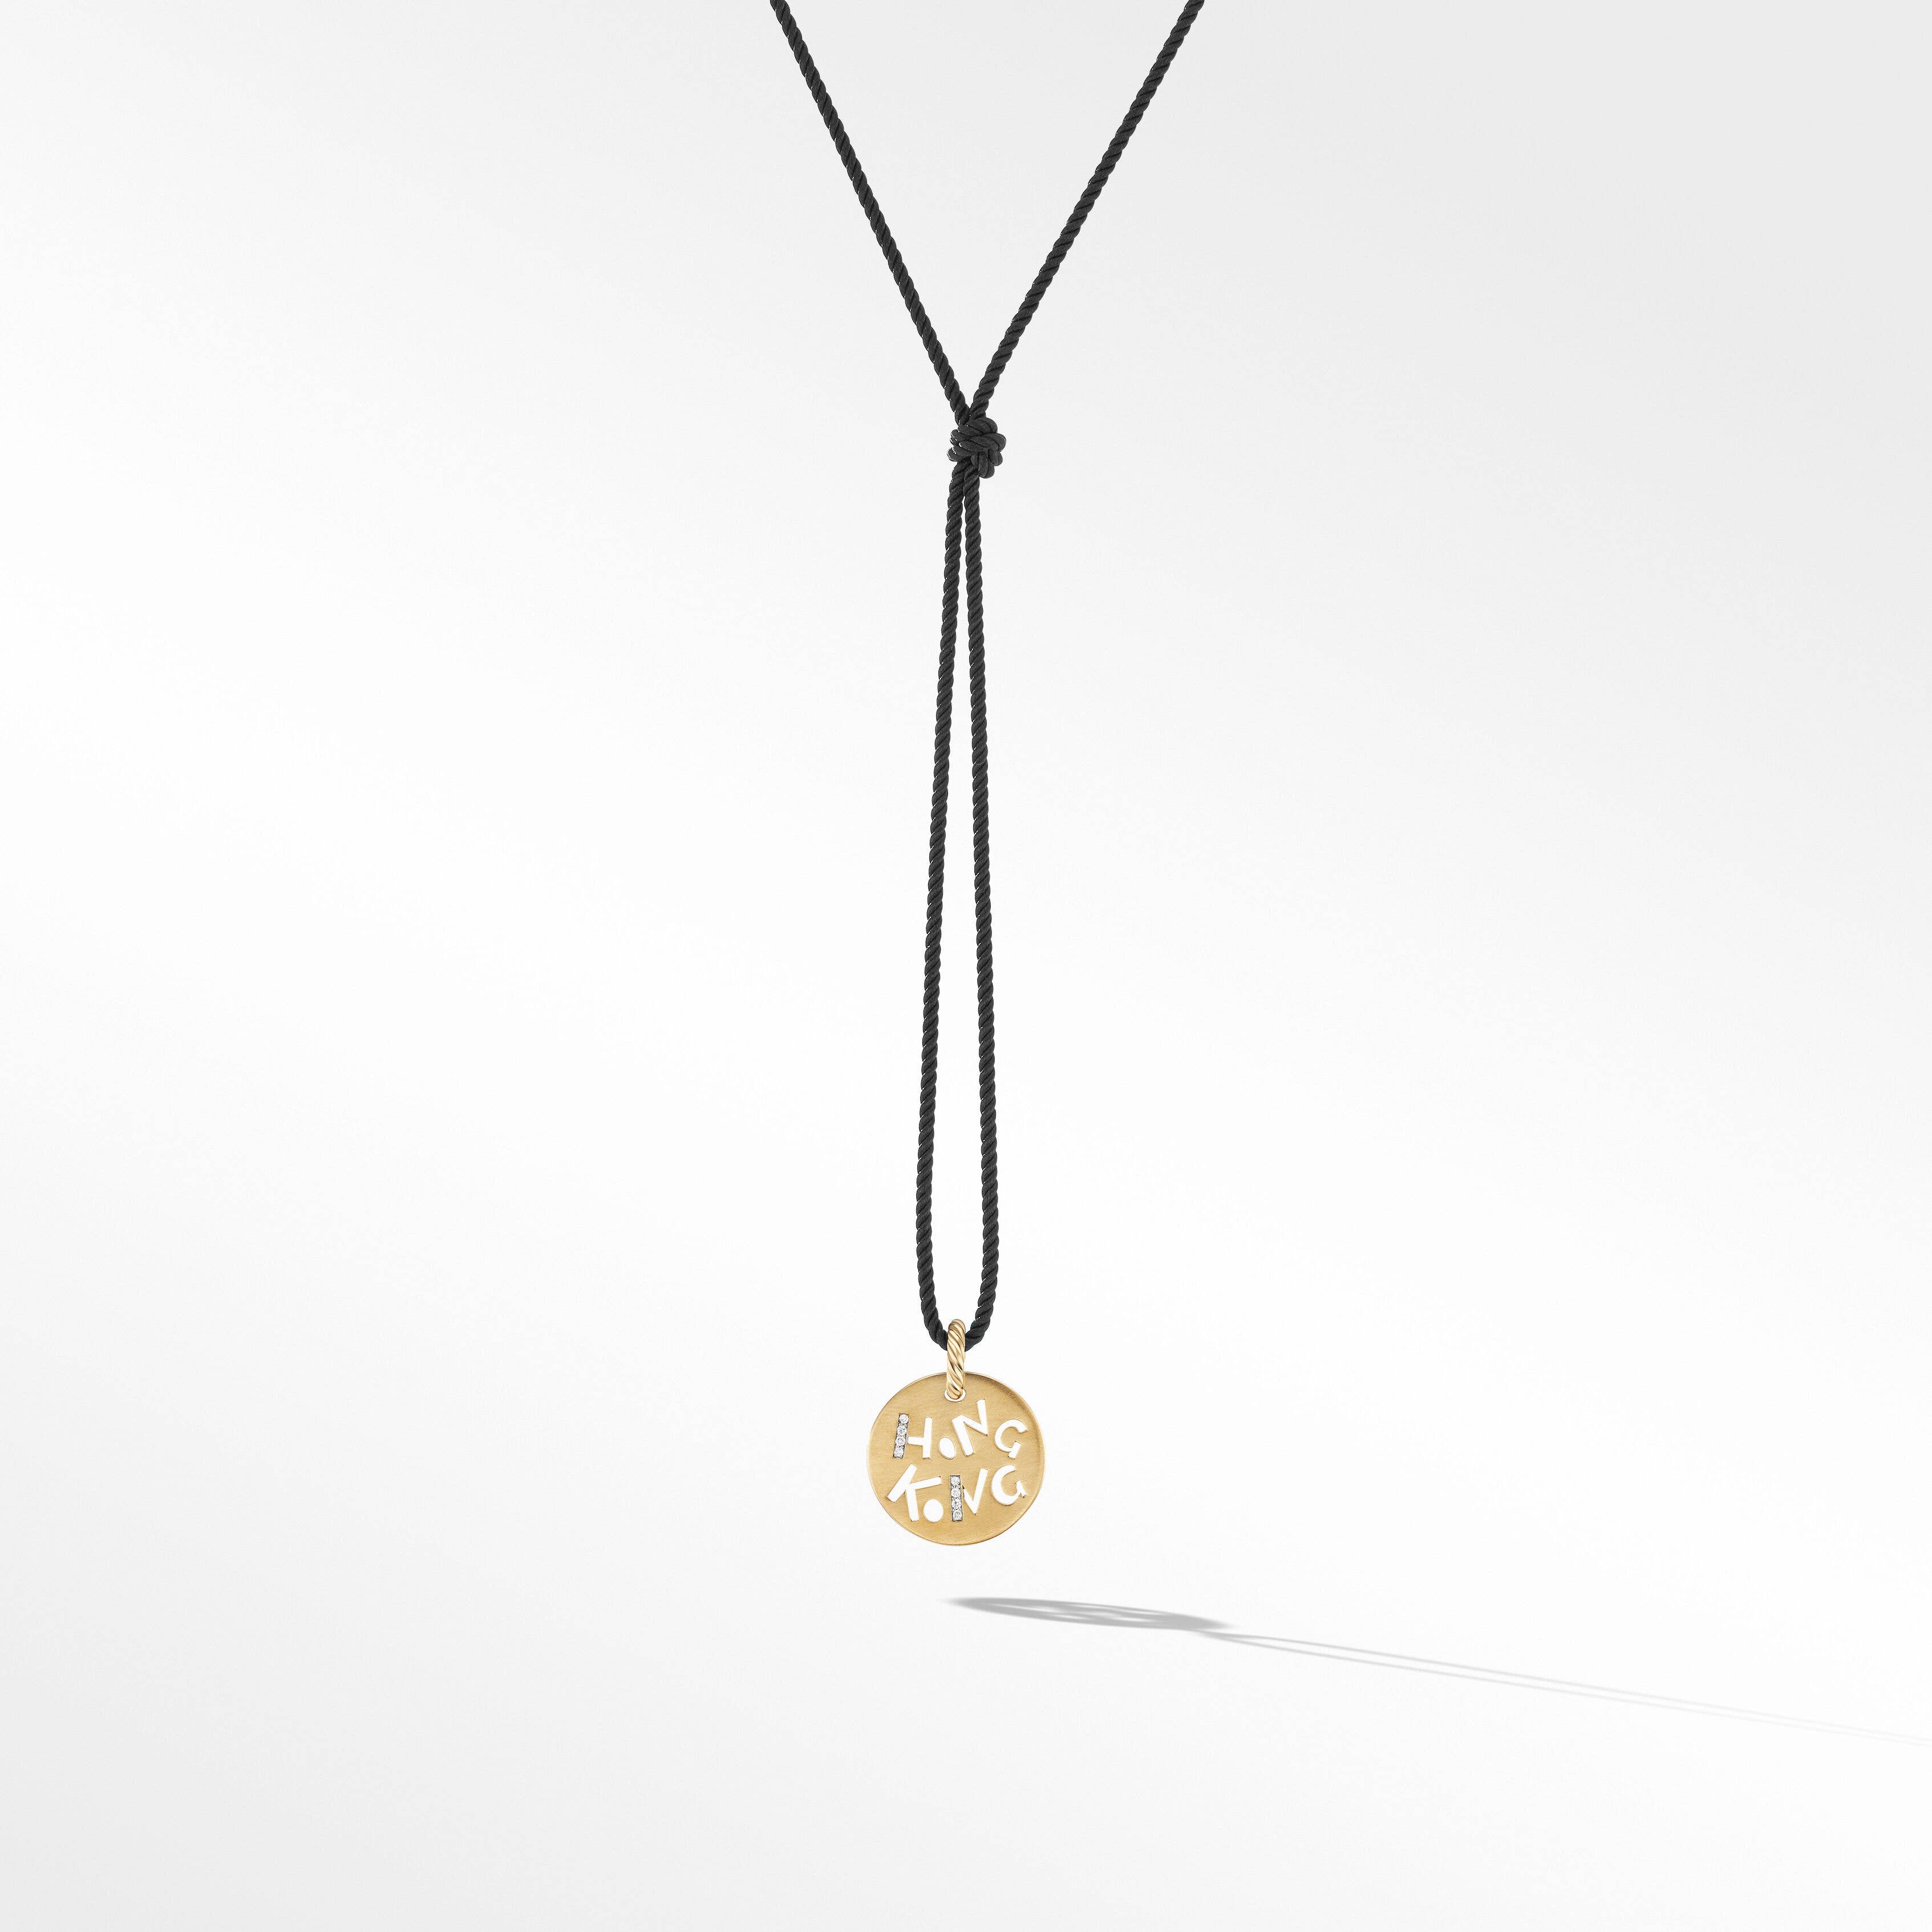 DY Elements® Hong Kong Pendant Necklace in 18K Yellow Gold with Diamonds